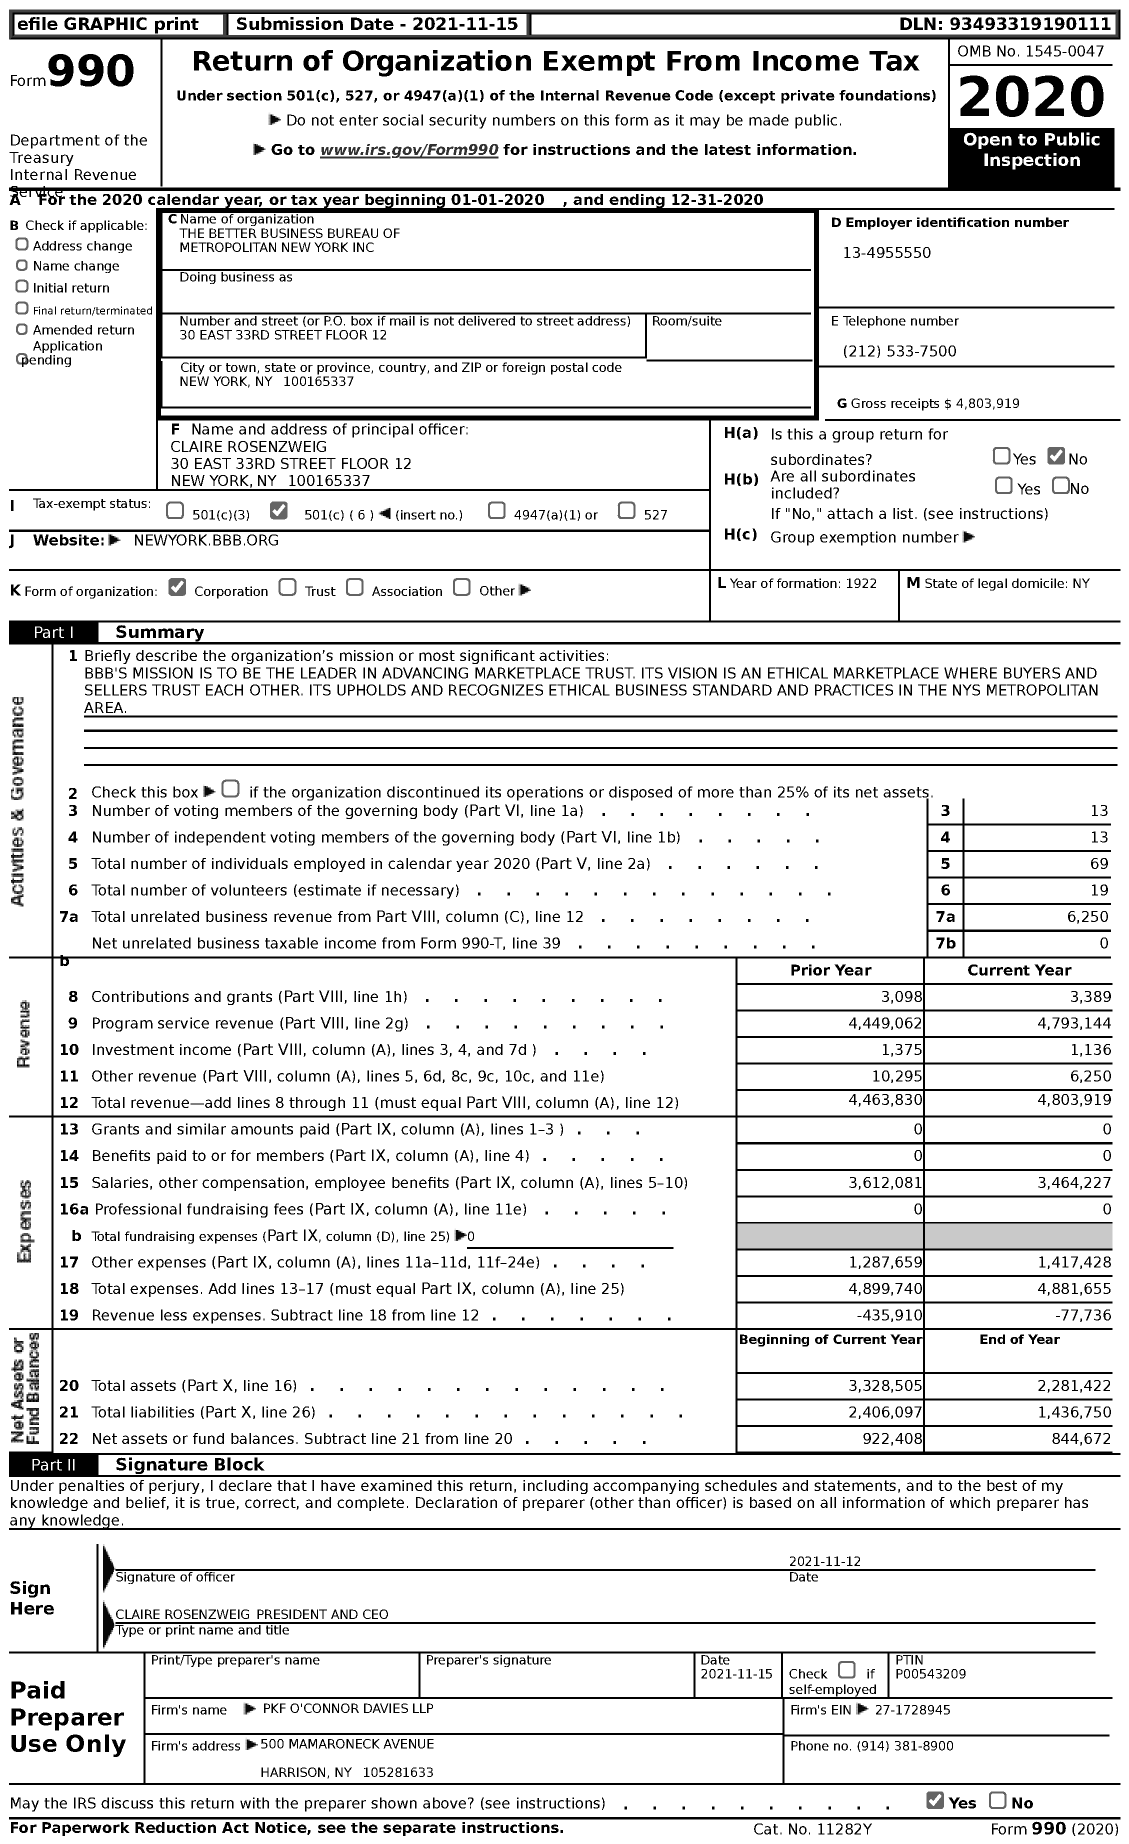 Image of first page of 2020 Form 990 for The Better Business Bureau of METROPOLITAN NEW YORK